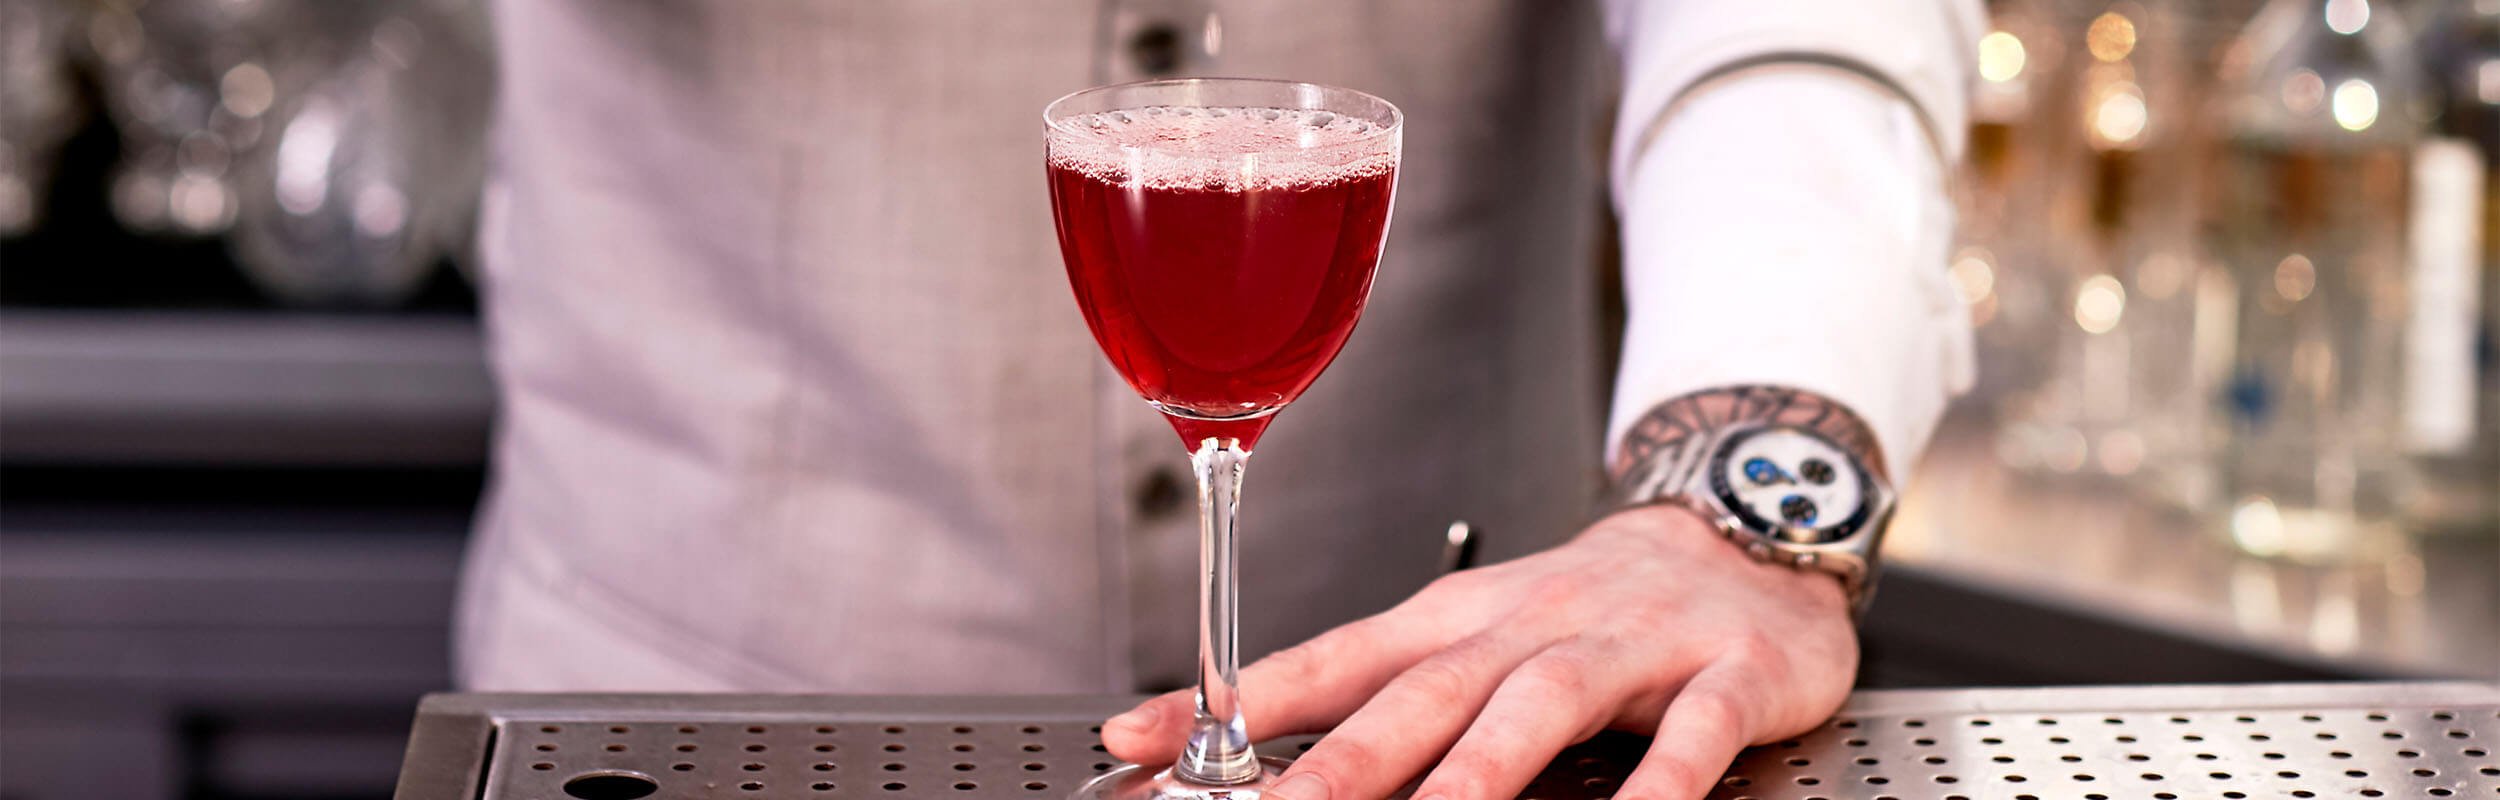 Lady flower cocktail recipe